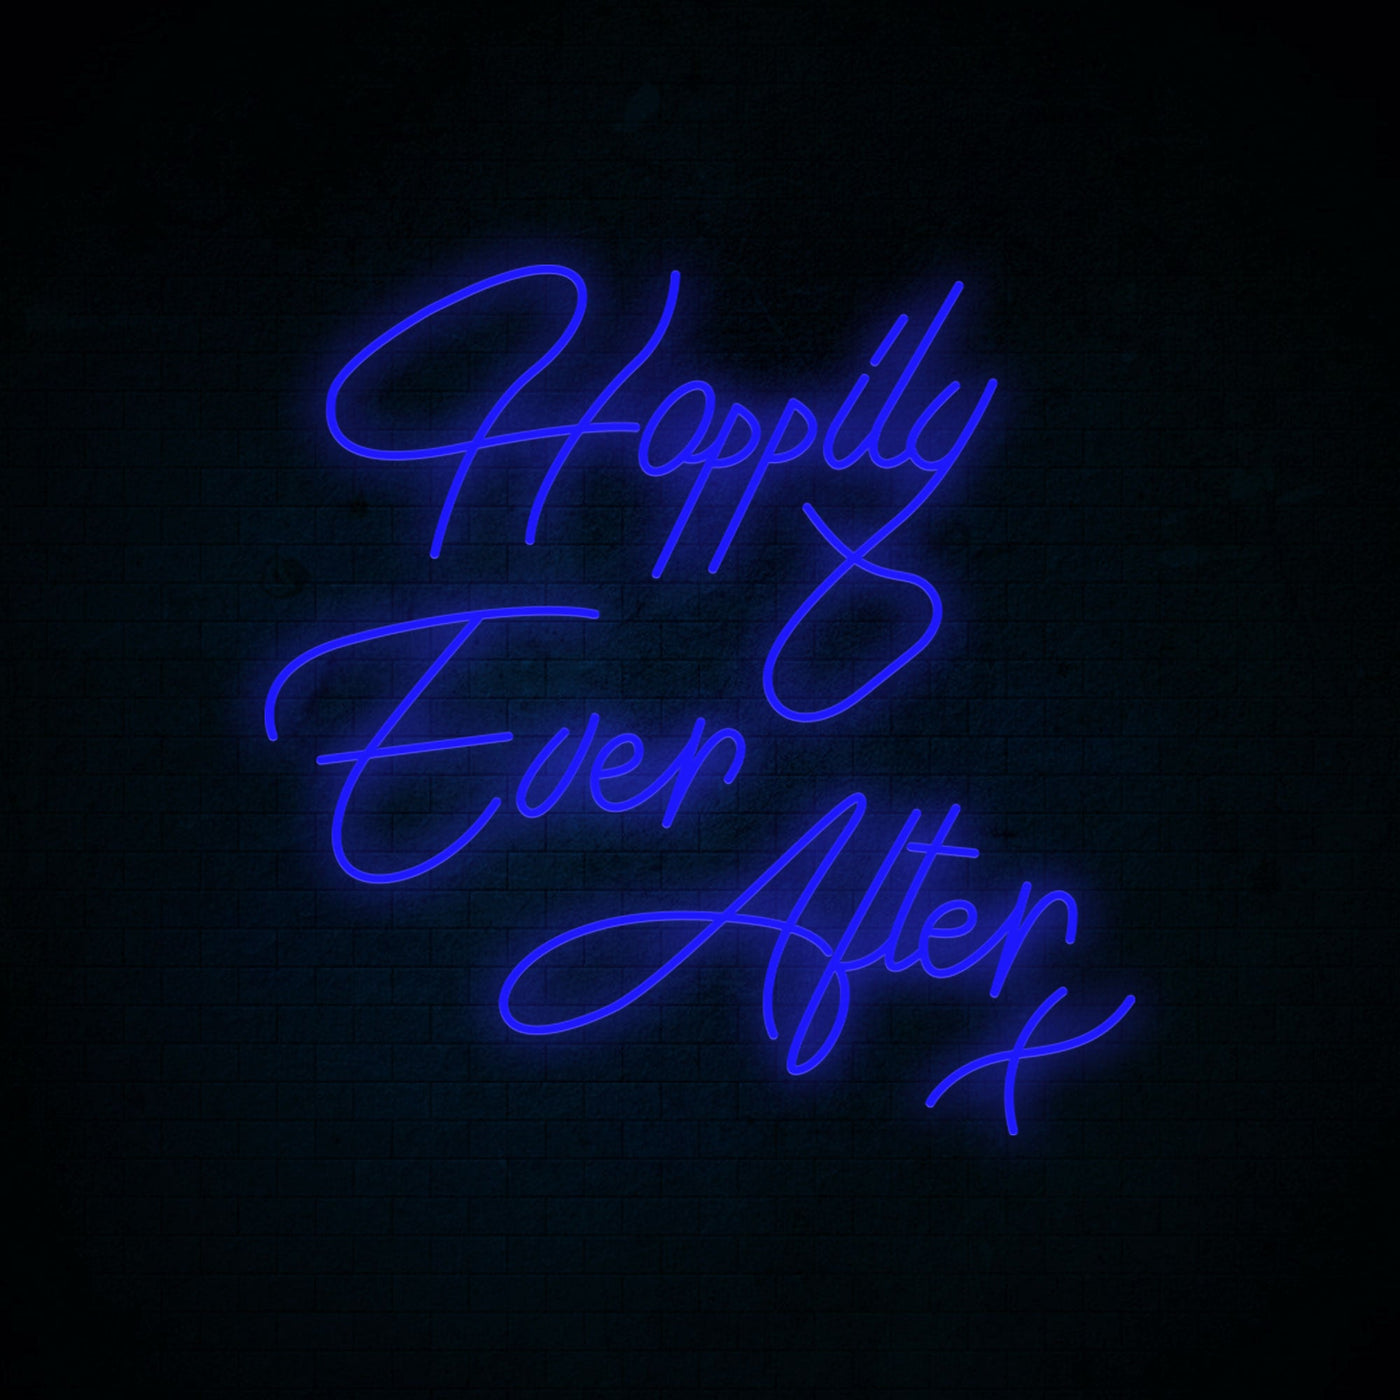 Happily Ever After x Neon Signs Led Neon Light Wedding Photo Backdrop Hanging